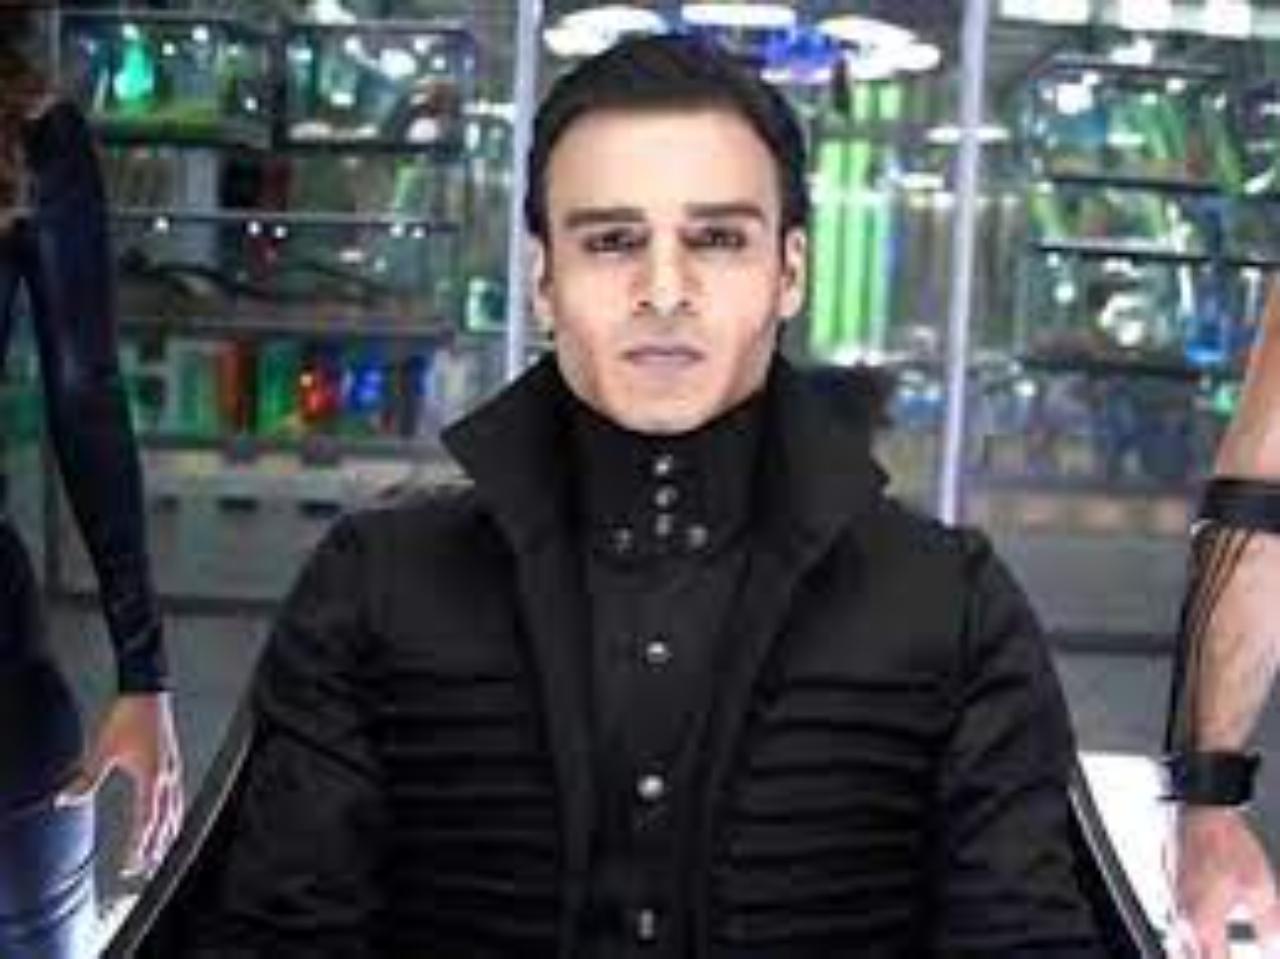 Vivek Oberoi-Krrish 3: His potential was evident when Rakesh Roshan cast him in Krrish 3. He portrayed a half-paralyzed guy with extraordinary abilities. His character was dressed entirely in black, with strong kajal in his eyes